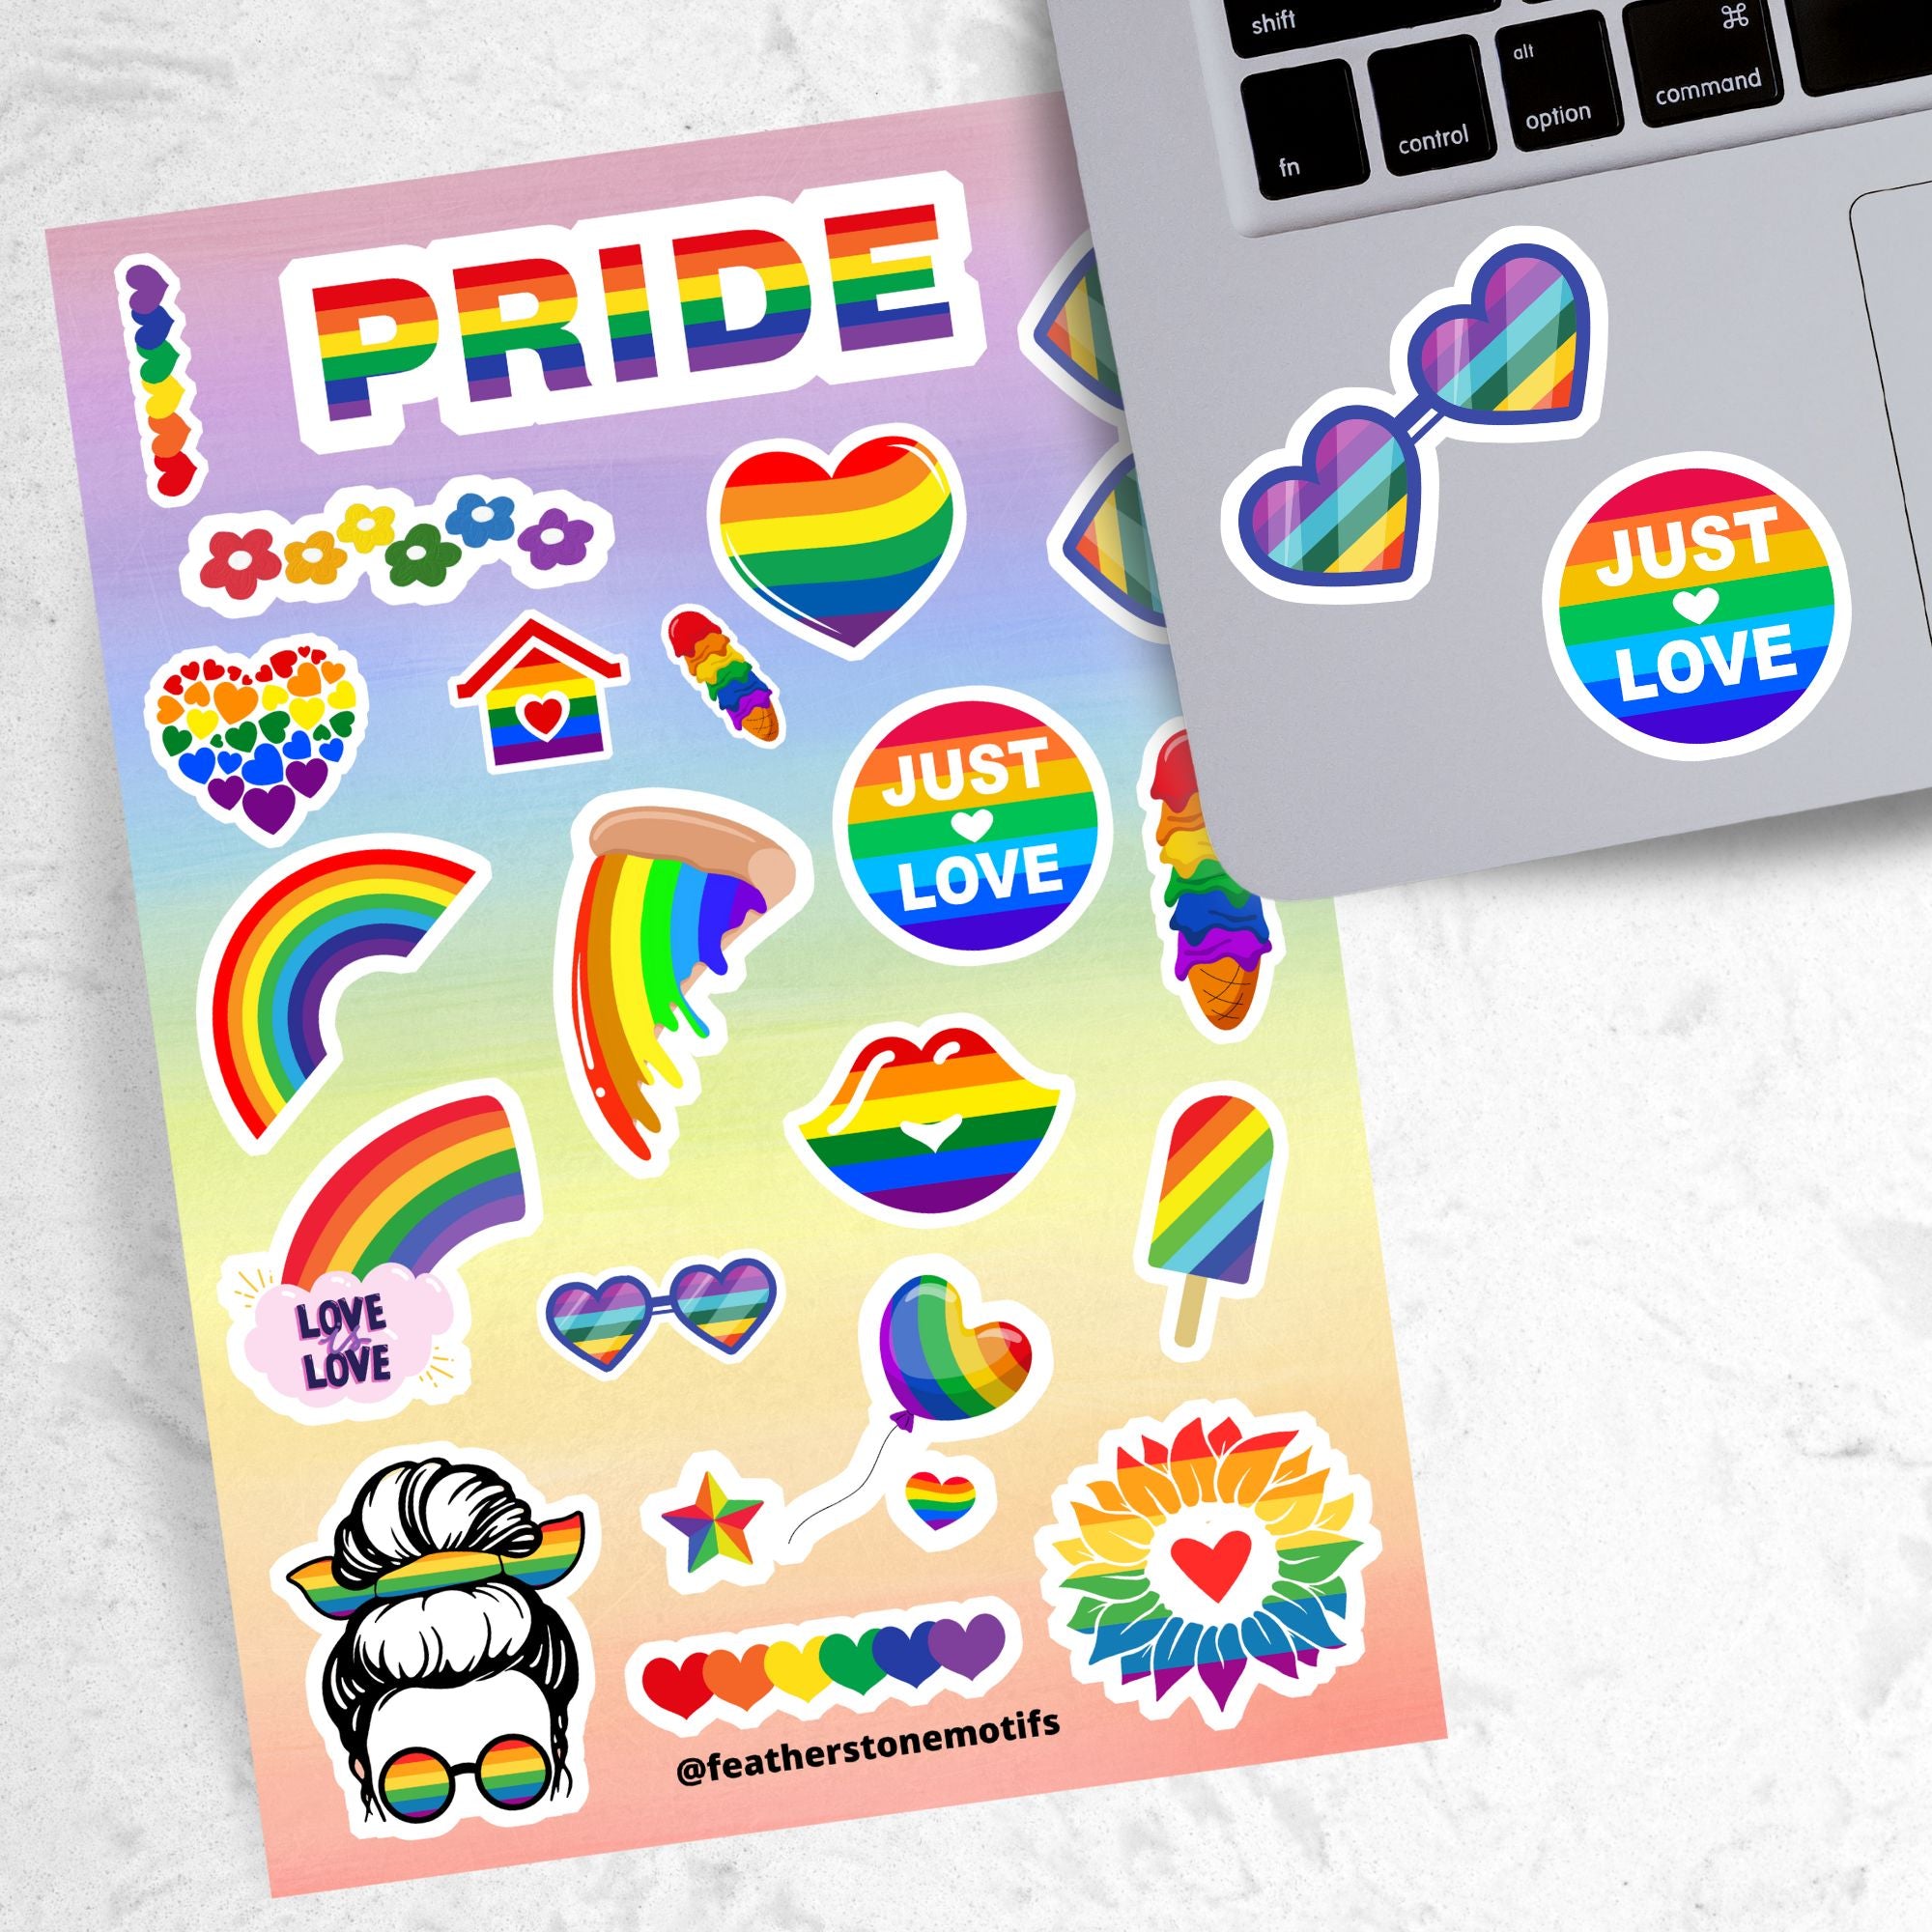 Show your LGBTQ Pride with this sticker sheet! This sticker sheet is filled with rainbow Pride images that are perfect for anywhere you want to show your Pride. This image is of the sticker sheet next to an open laptop with a sticker of heart rainbow glasses and an sticker saying Just Love applied below the keyboard.